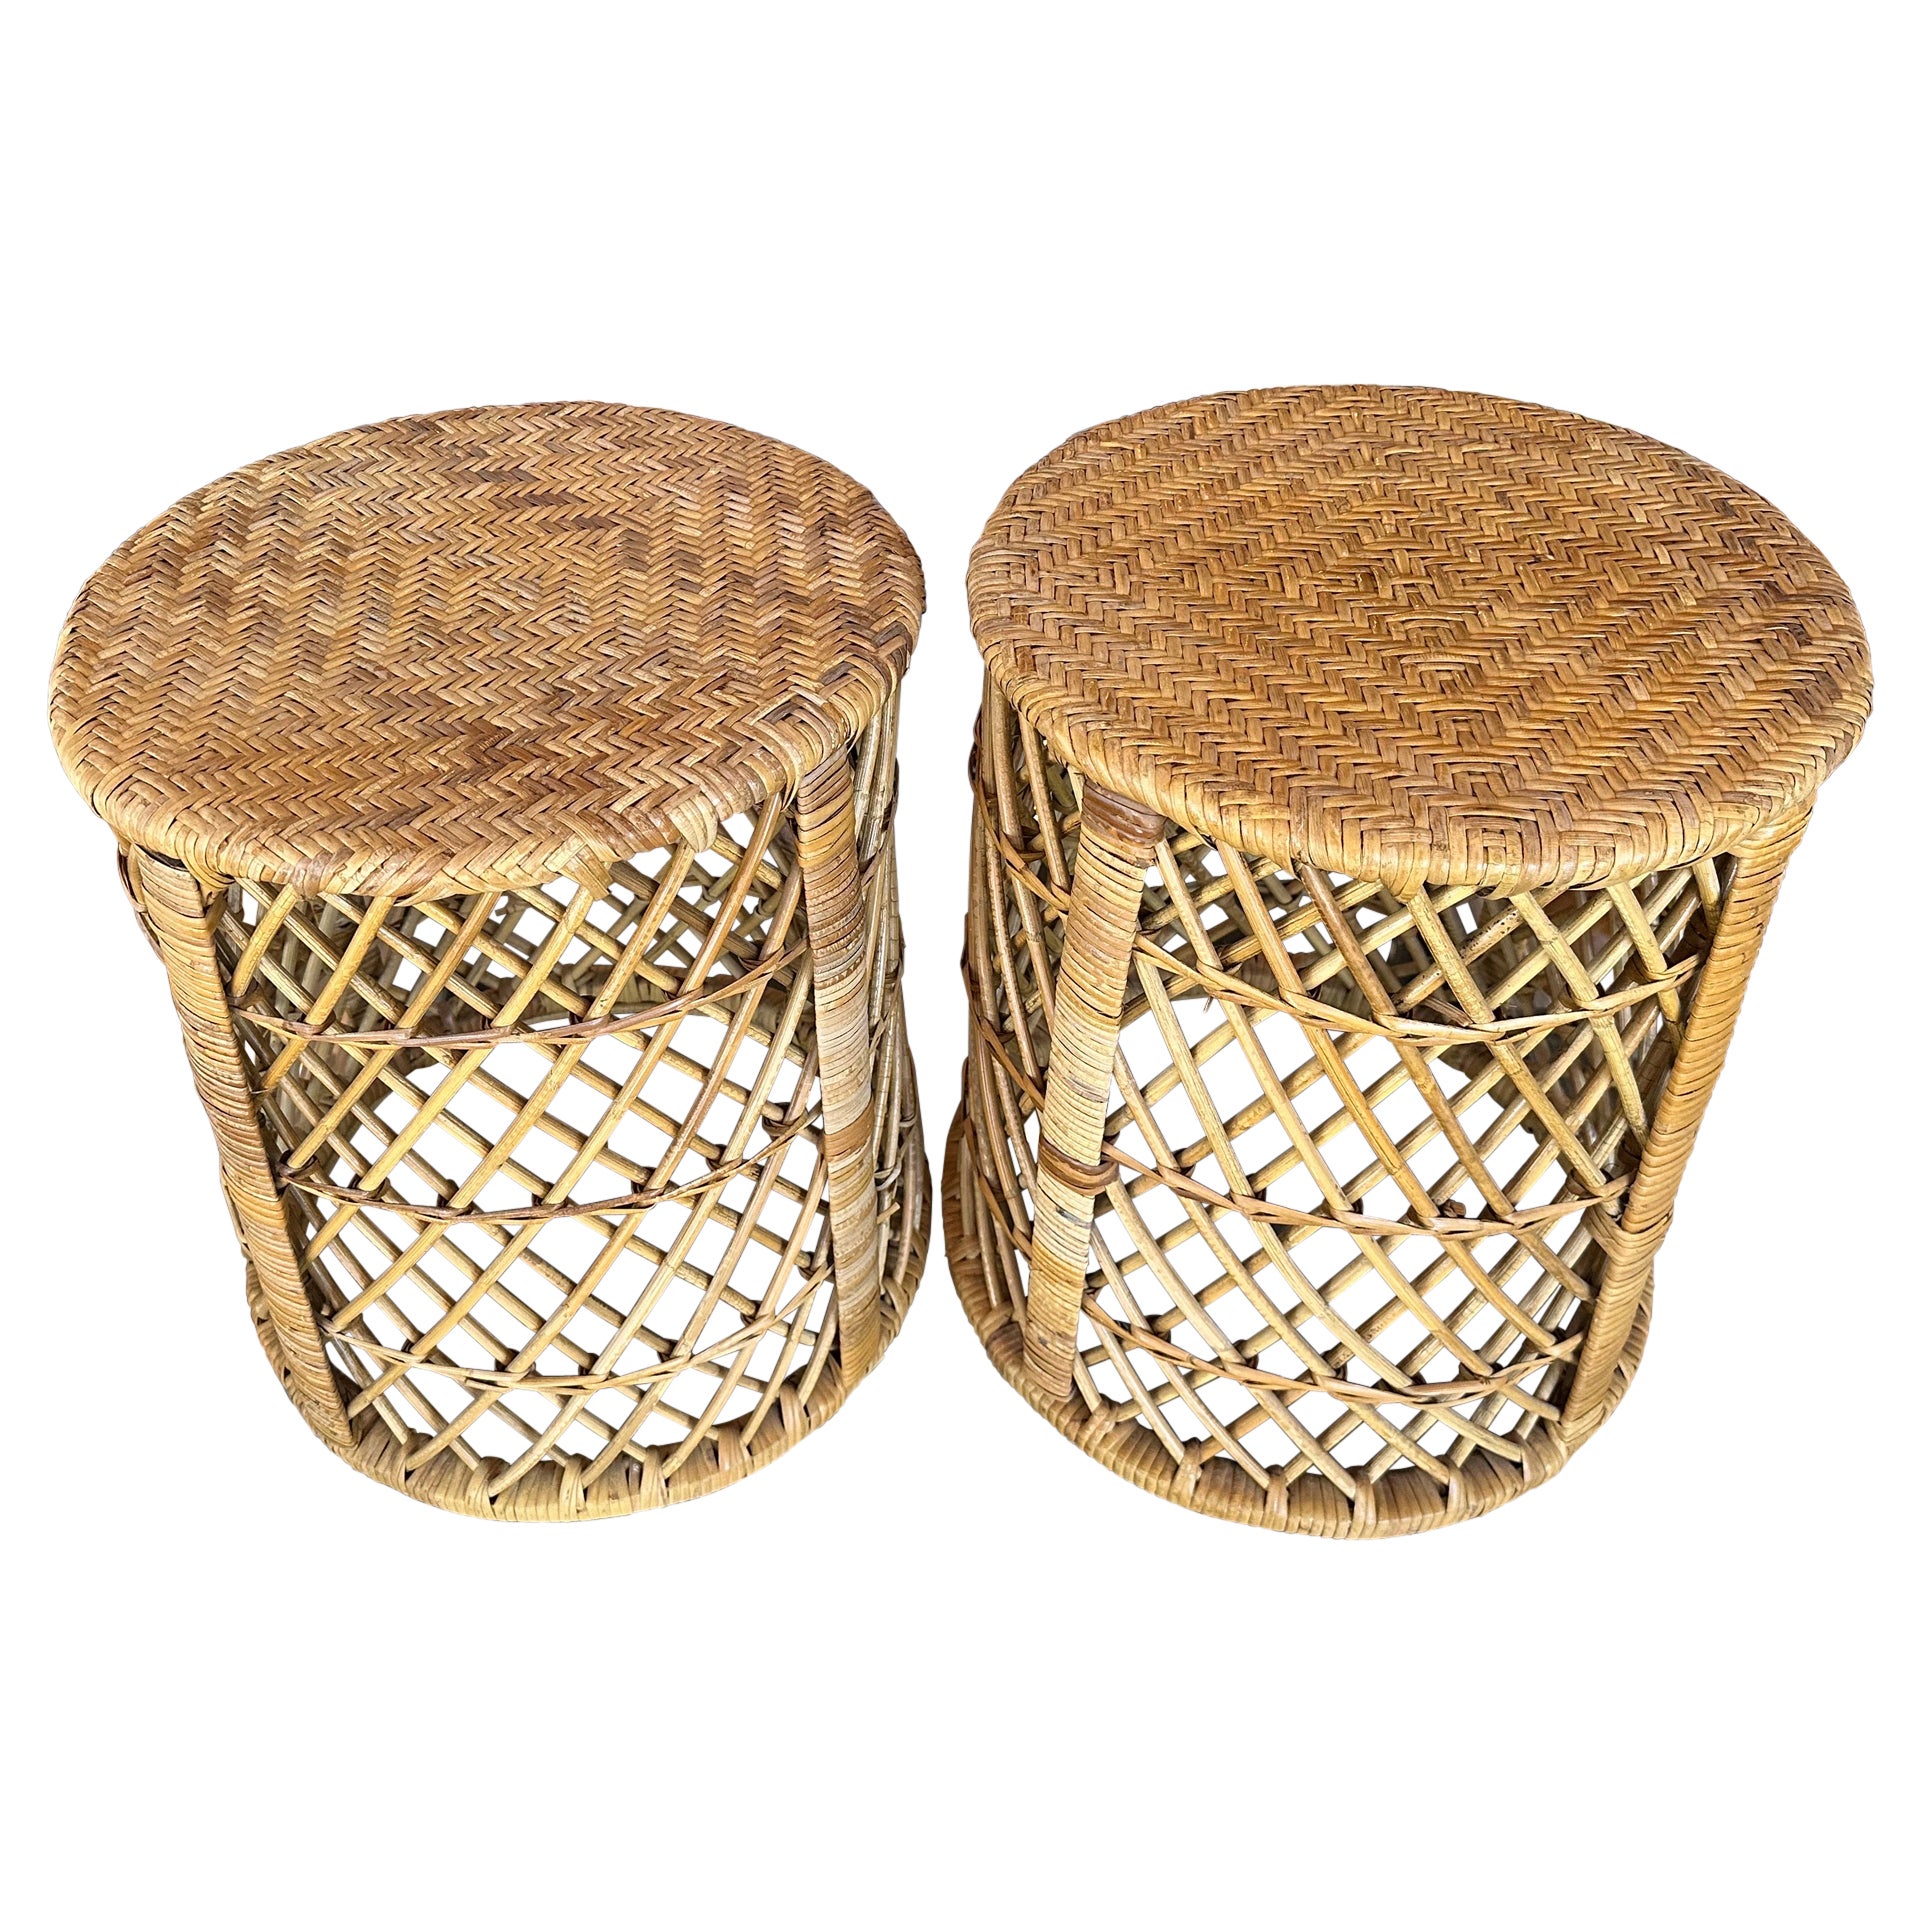 Vintage Palm Beach Pair of Woven Rattan & Bamboo Drum Stools Benches 